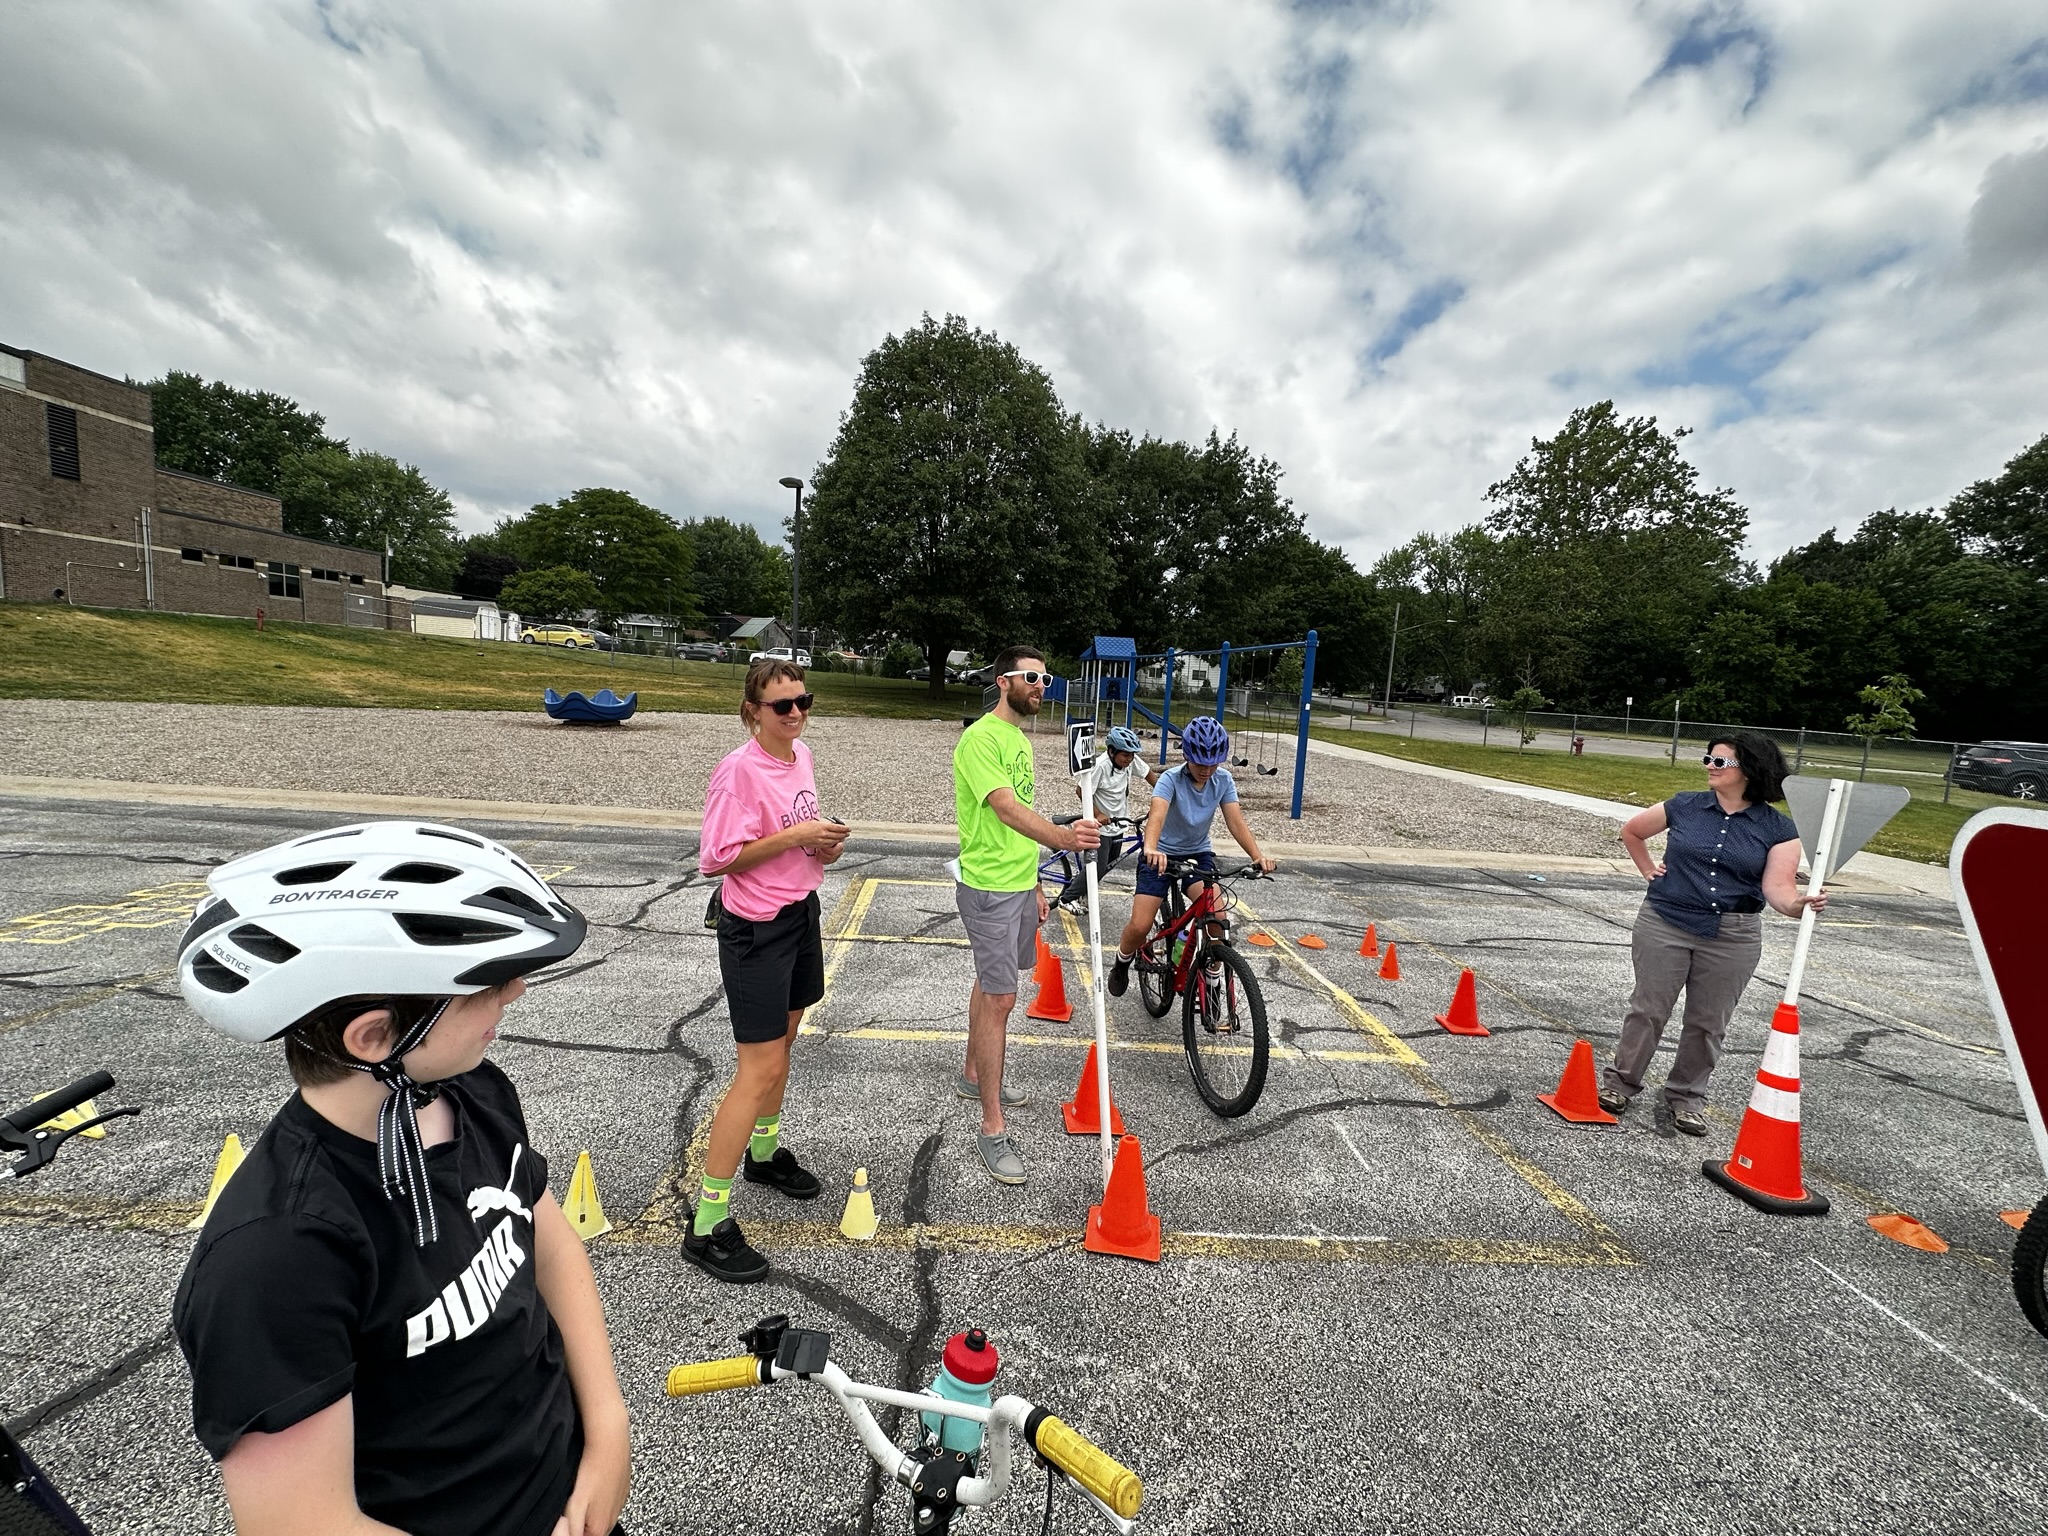 Bicycle education program in a parking lot at a school. A few children on bikes biking around cones and research staff helping